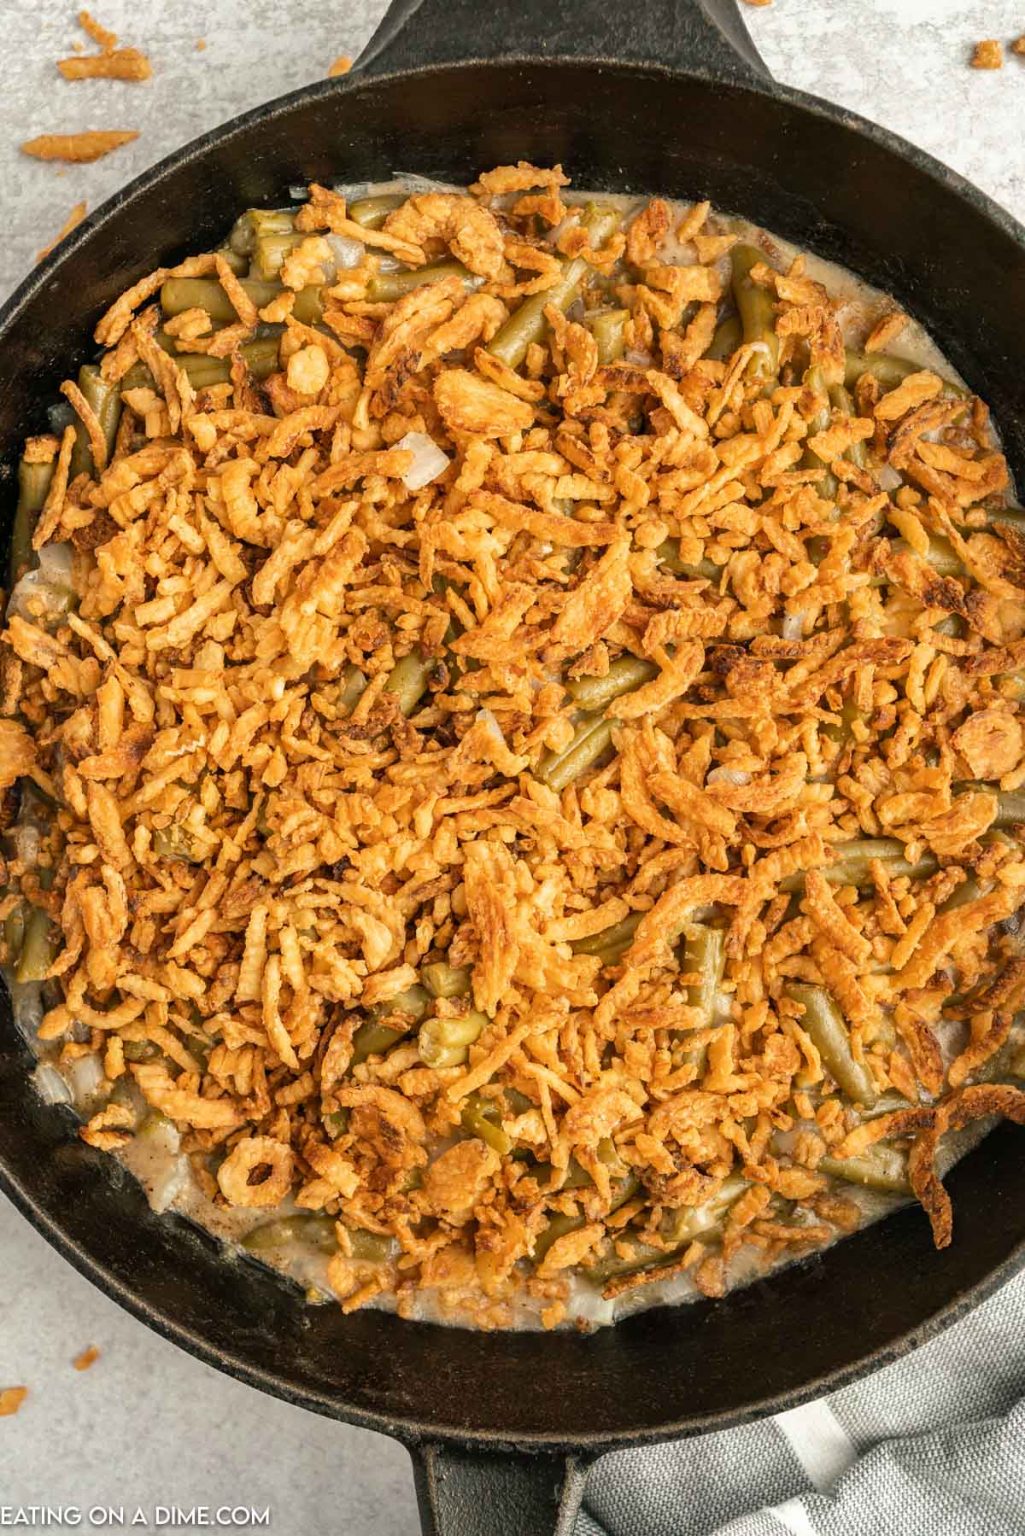 Skillet Green Bean Casserole Recipe Eating On A Dime